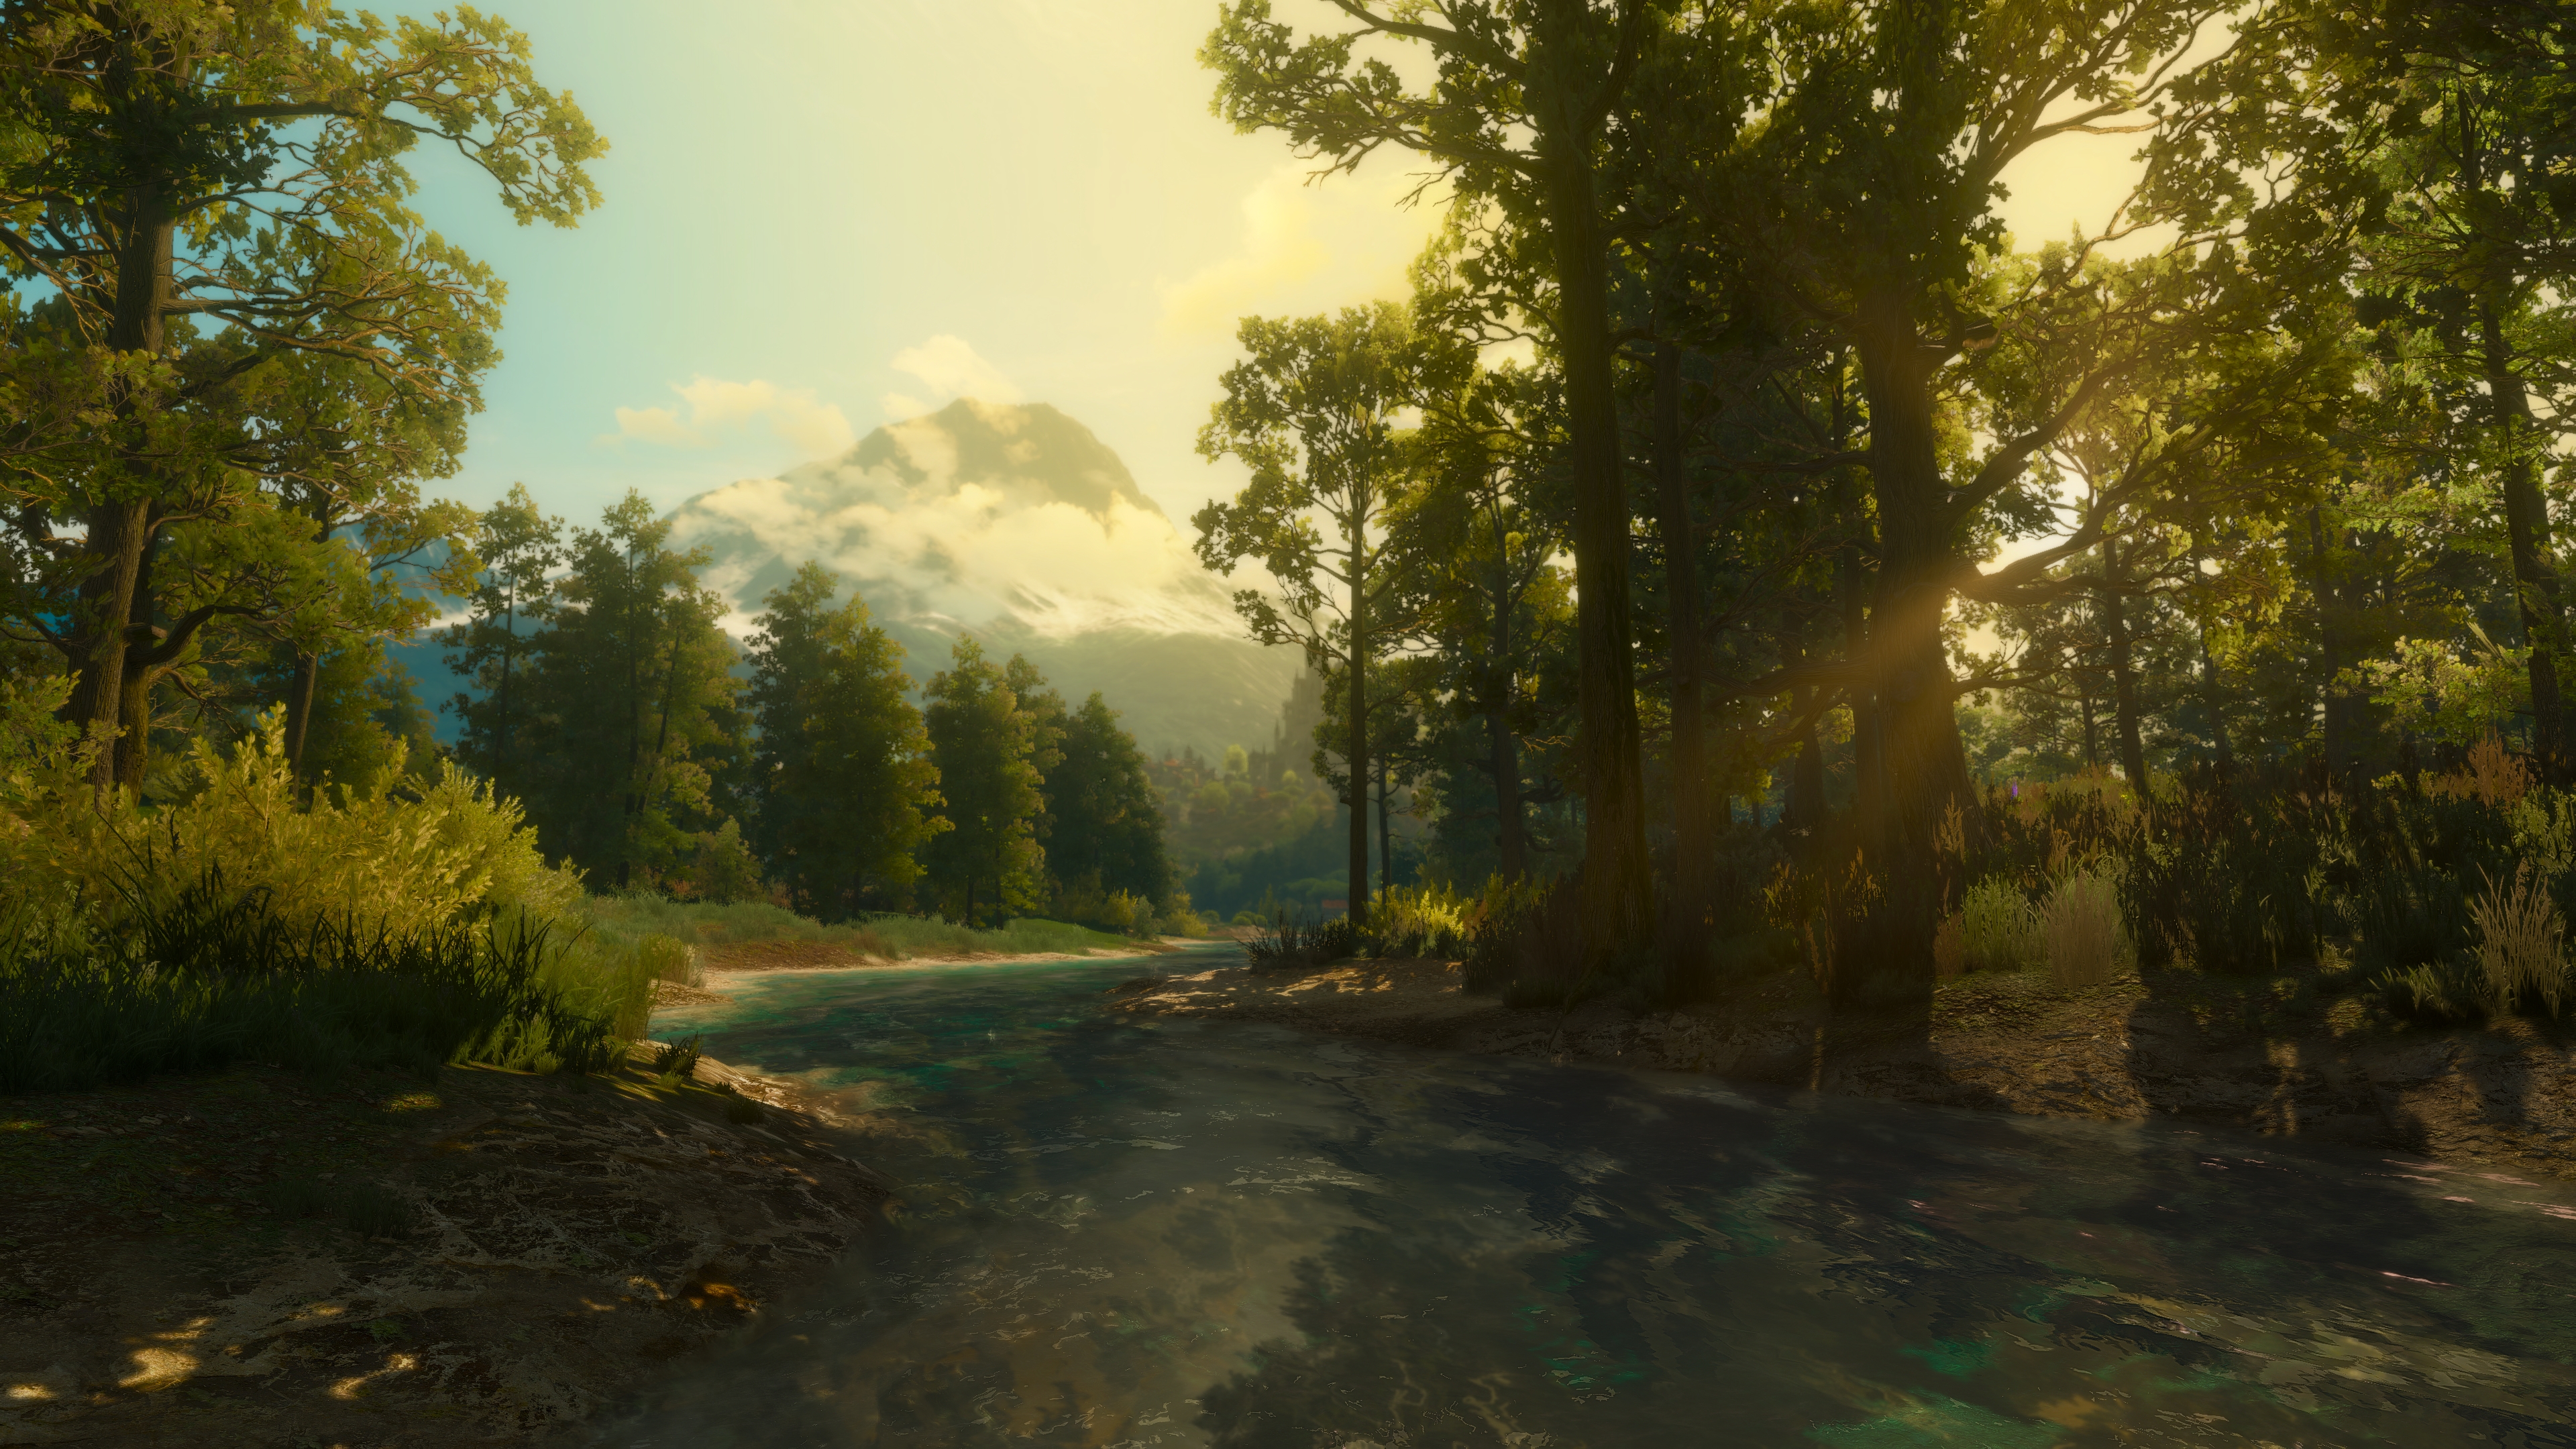 General 3840x2160 The Witcher 3: Wild Hunt PC gaming video games The Witcher 3: Wild Hunt - Blood and Wine landscape river forest trees tussent video game art screen shot clouds water sky reflection sunlight